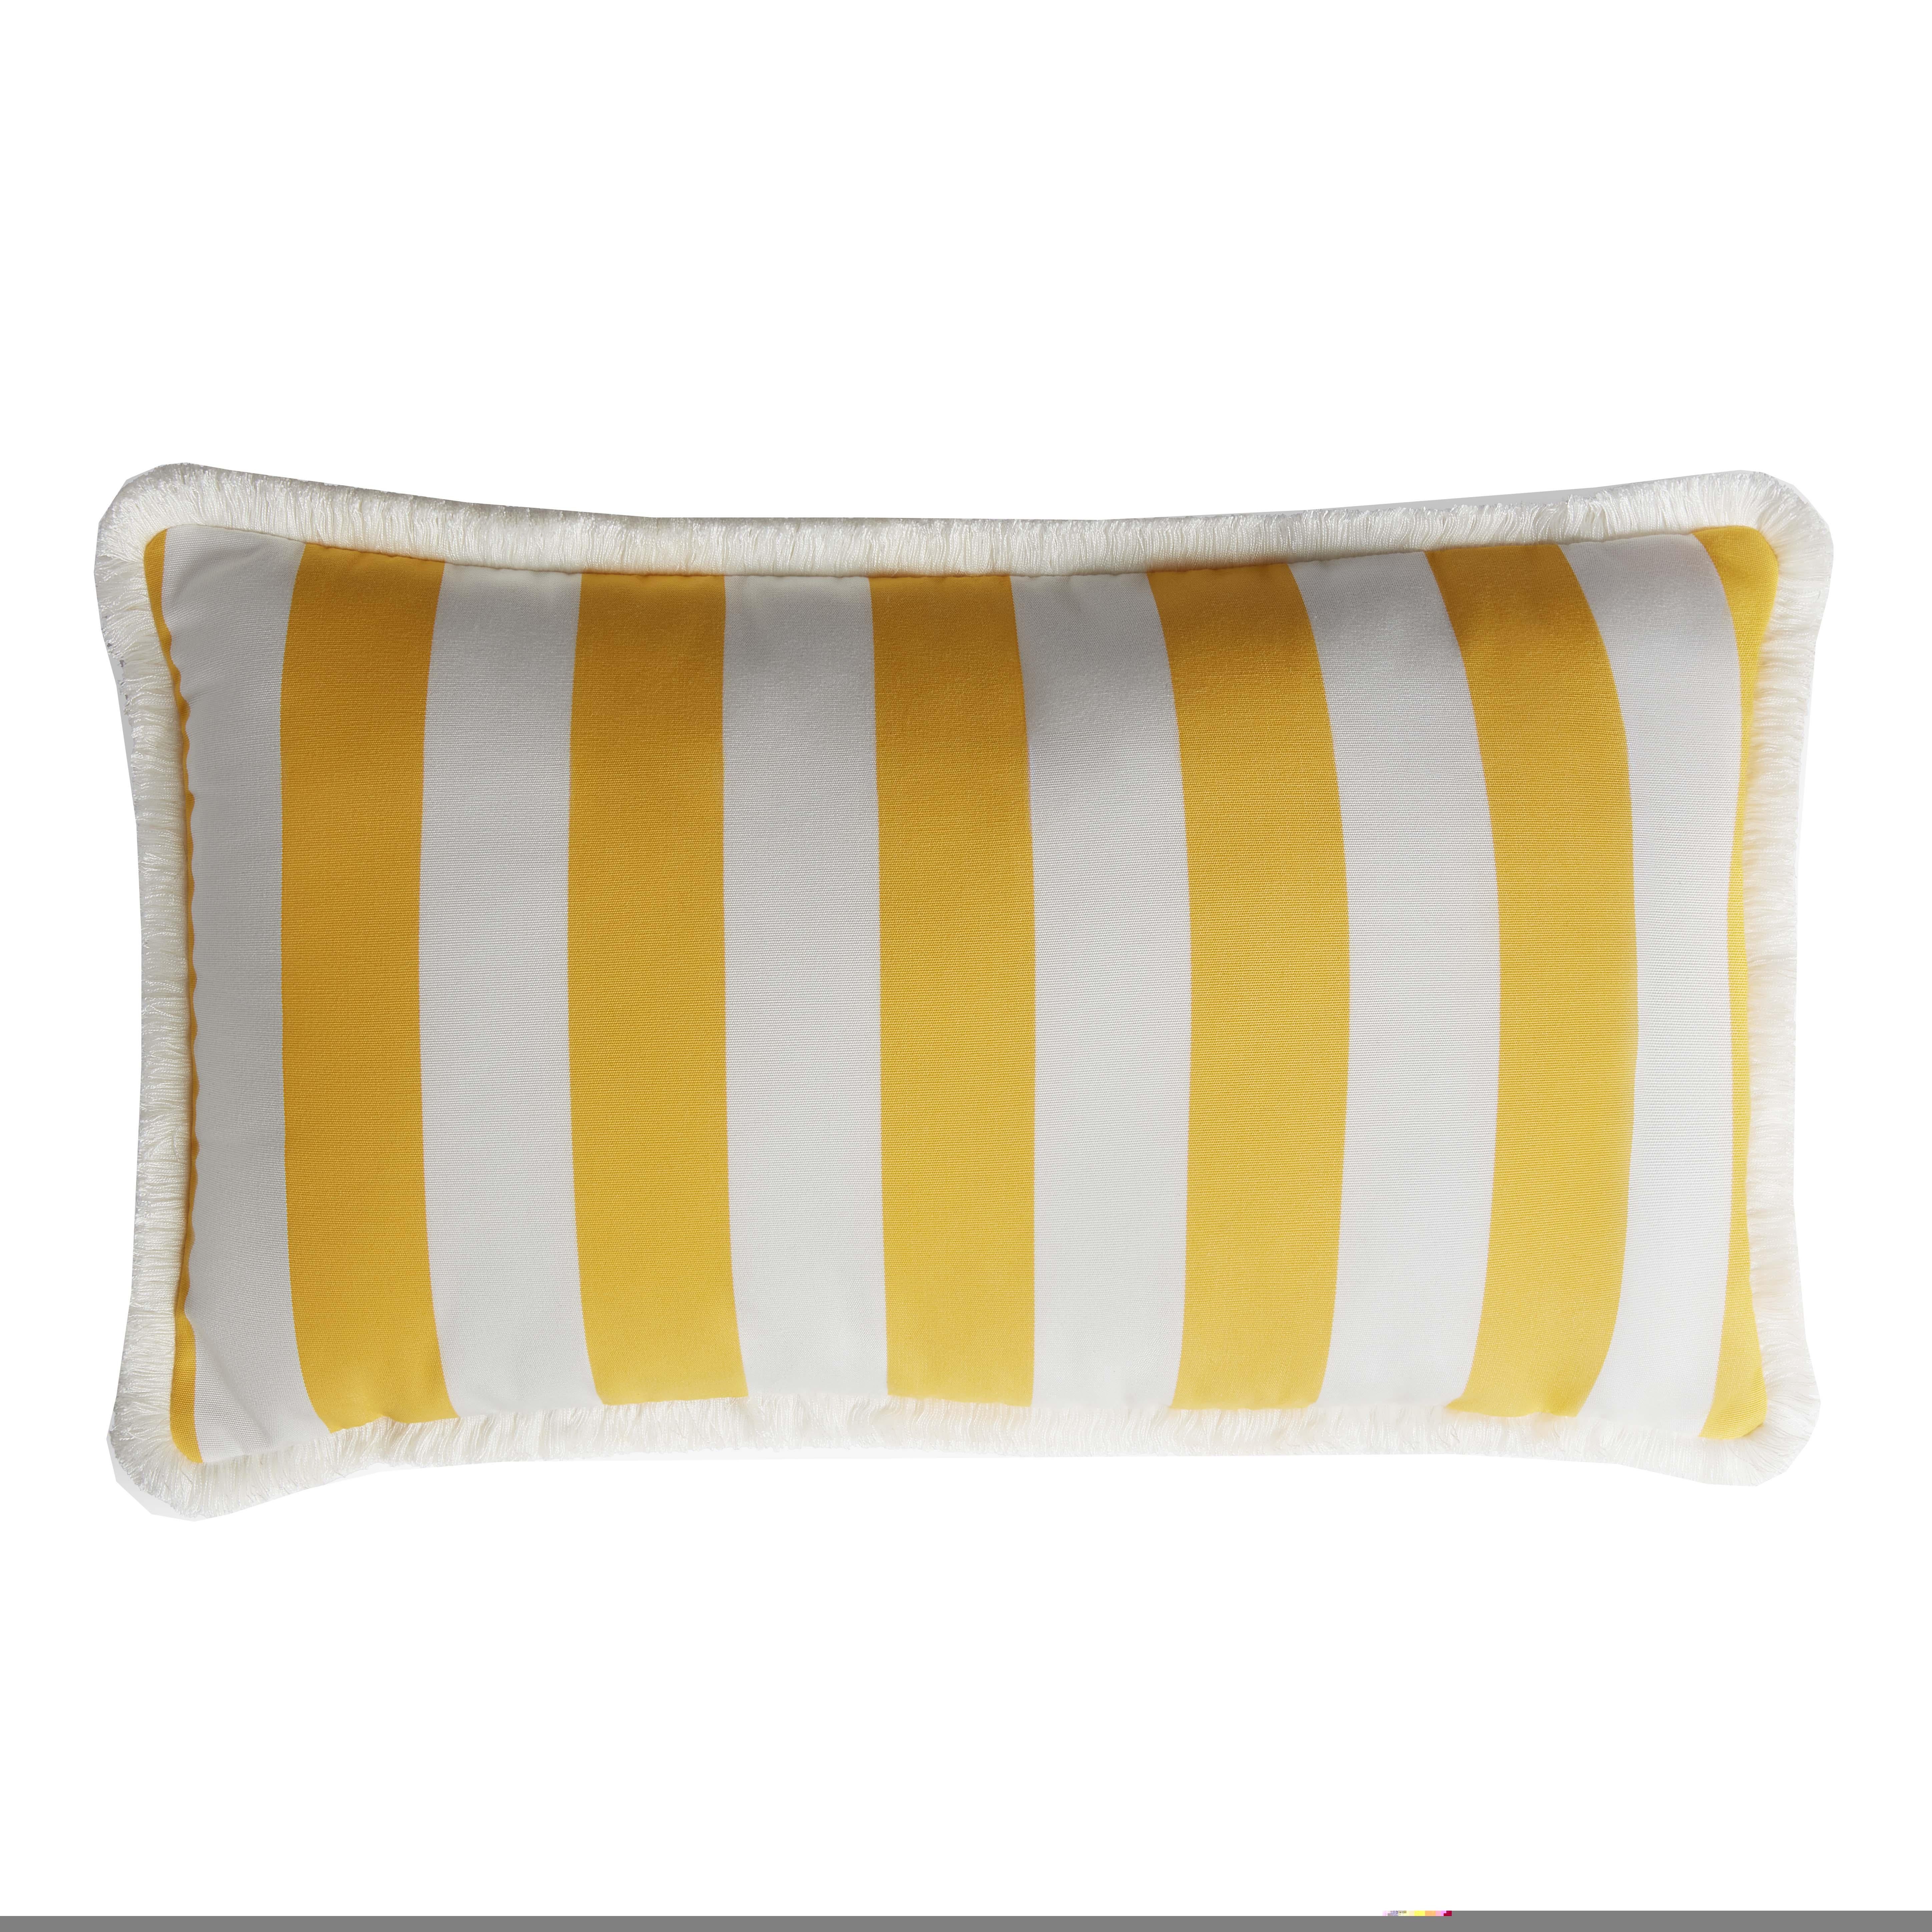 Acrylic Striped Happy Pillow Outdoor with Fringes White and Carbon Water Repellent For Sale